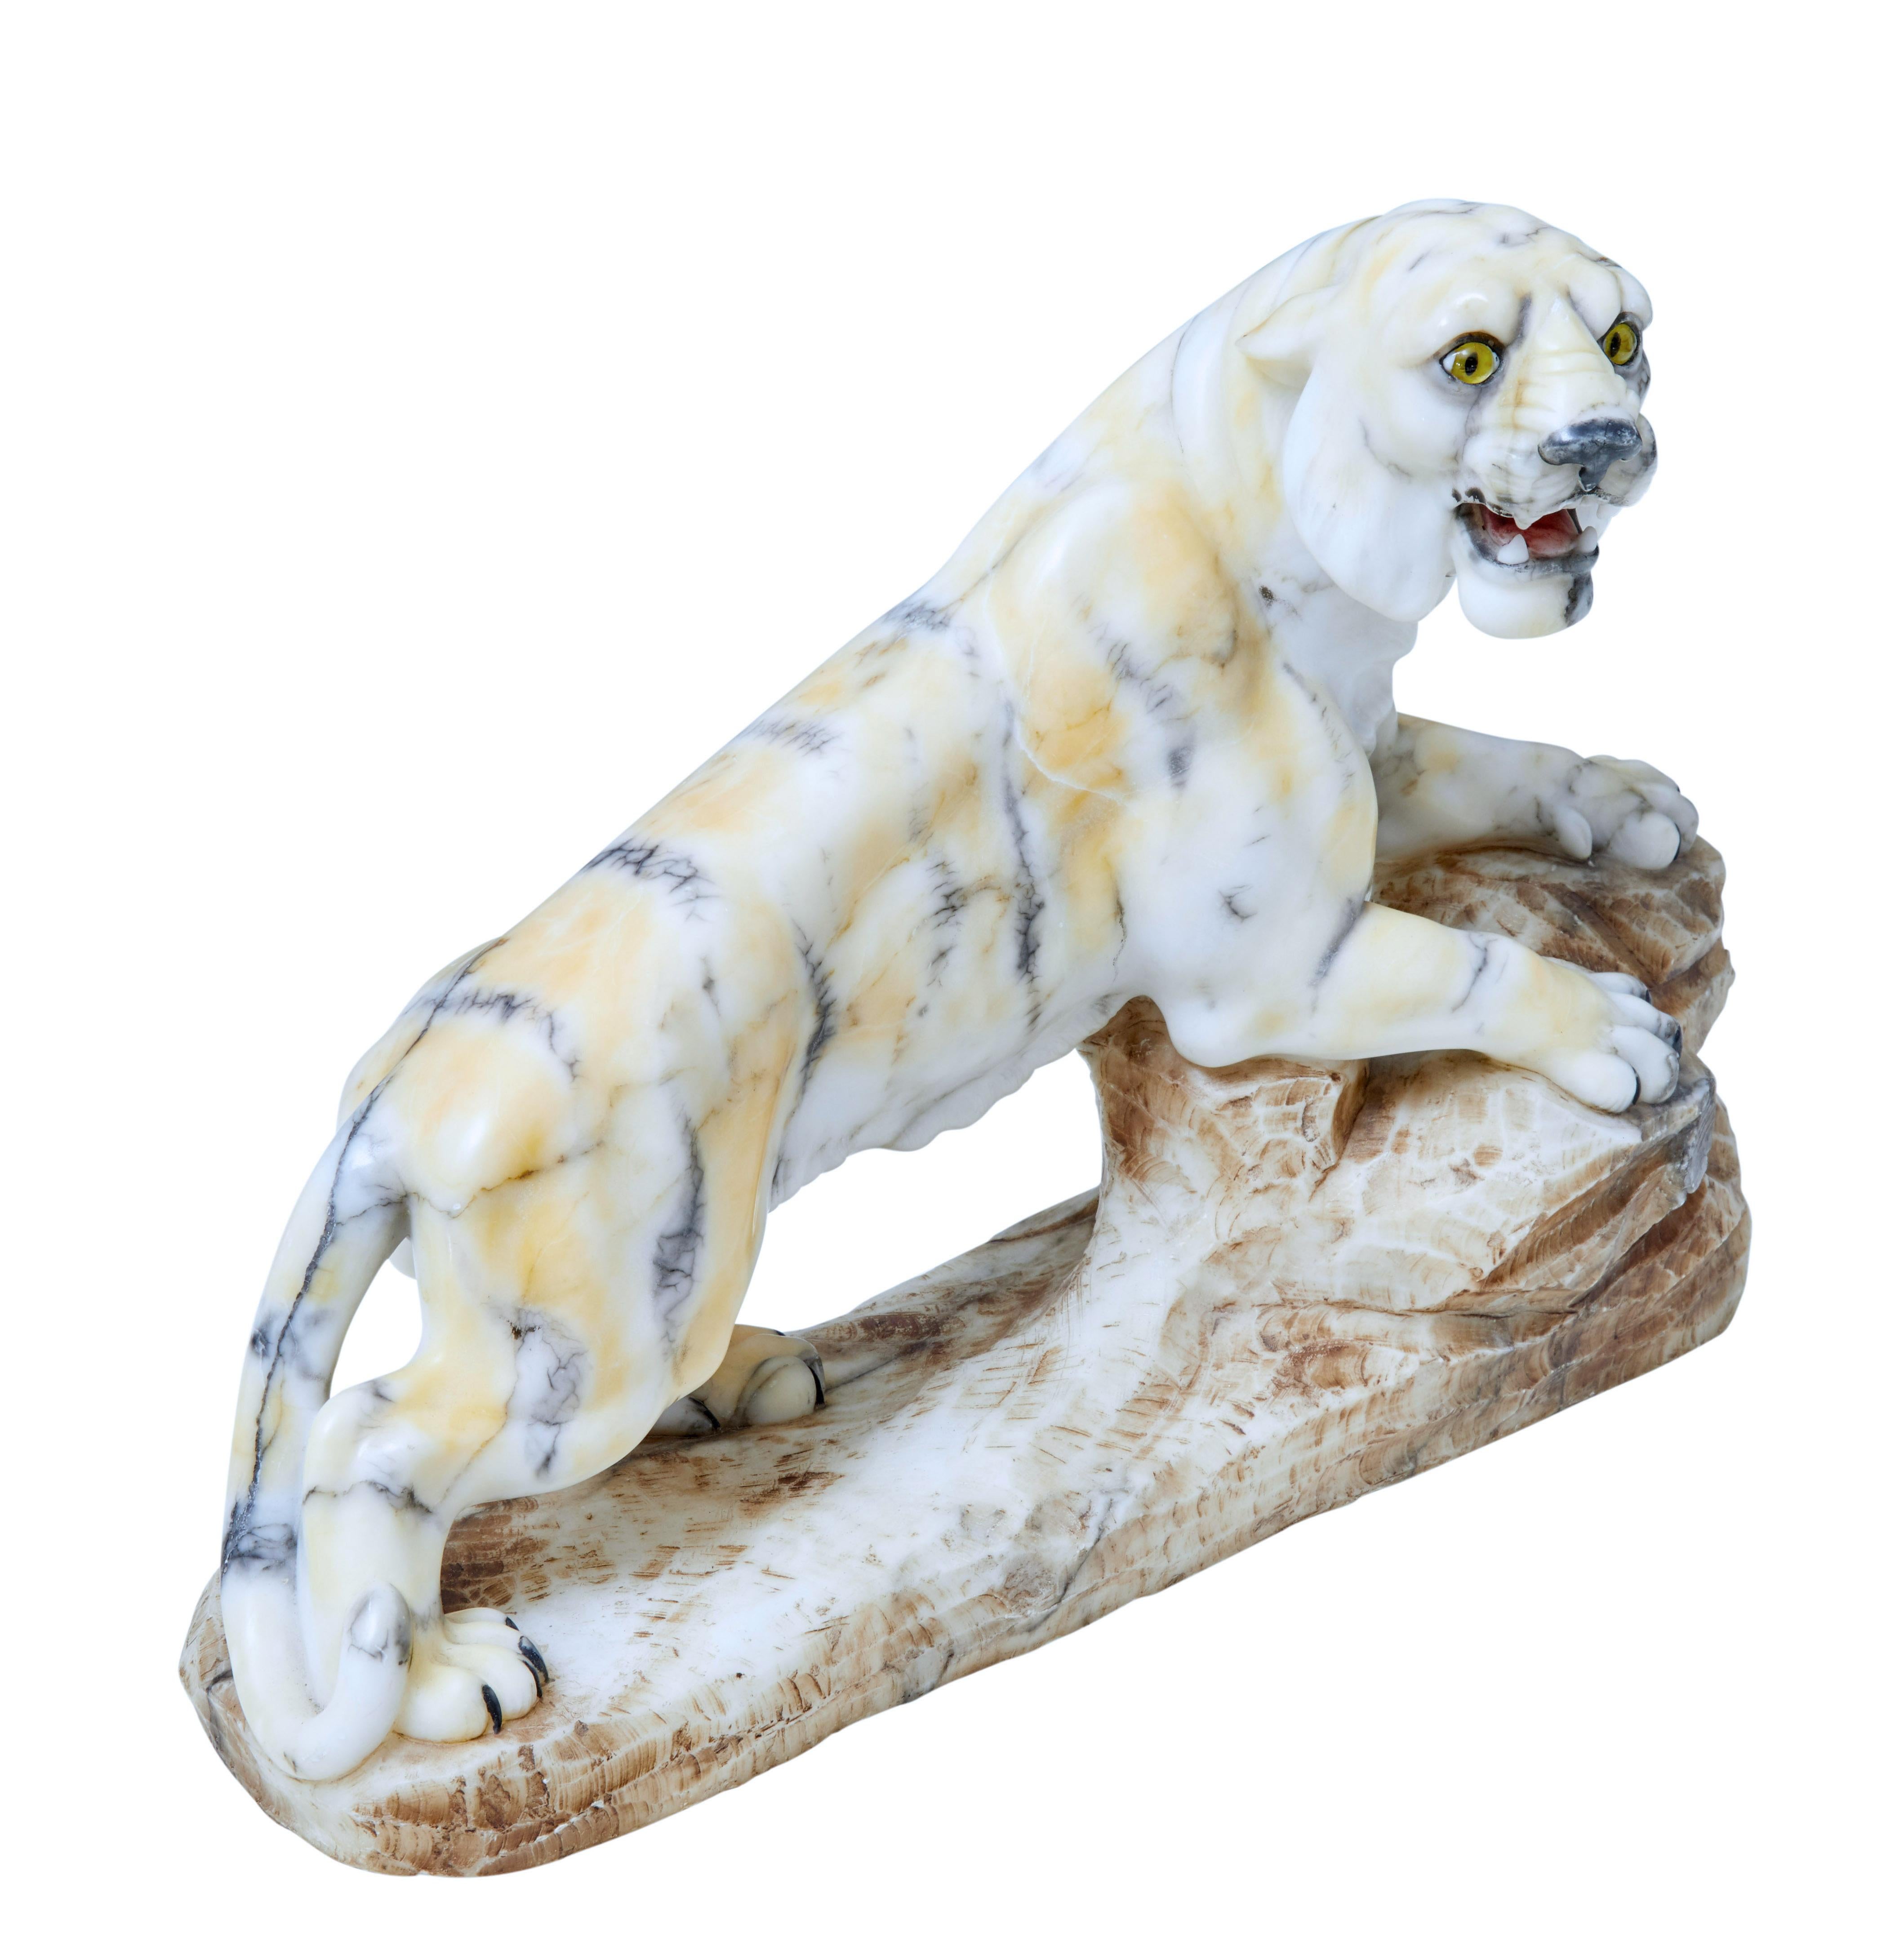 Good quality Art Deco period tiger, circa 1920.

Shown in a semi prone position while standing on a tree trunk or large branch.

Good size with no losses, minor surface marks.